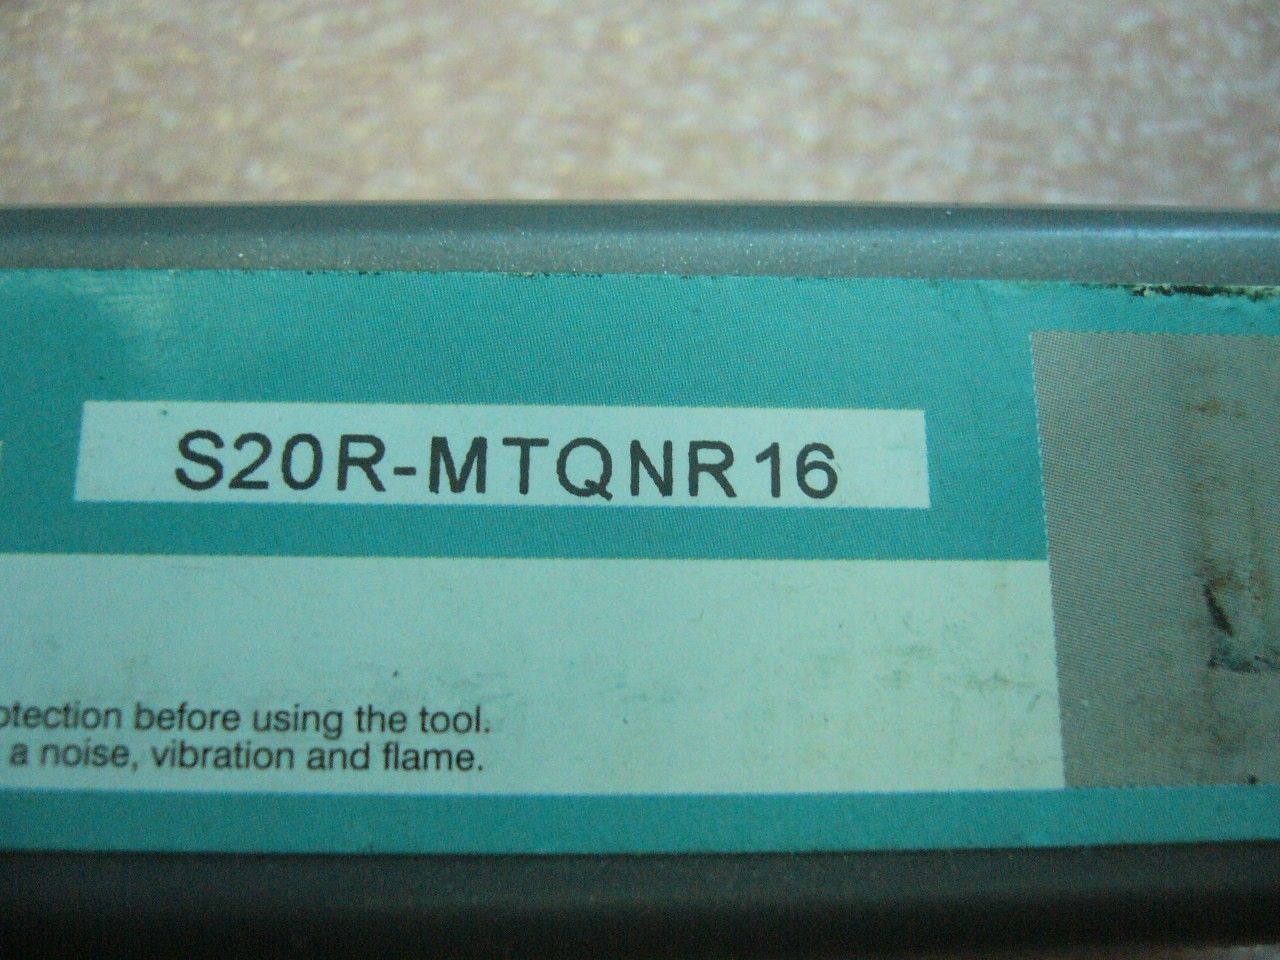 Boring Toolholder S20R-MTQNR16 for inserts TNMG1604.. TNMG33.. - Click Image to Close